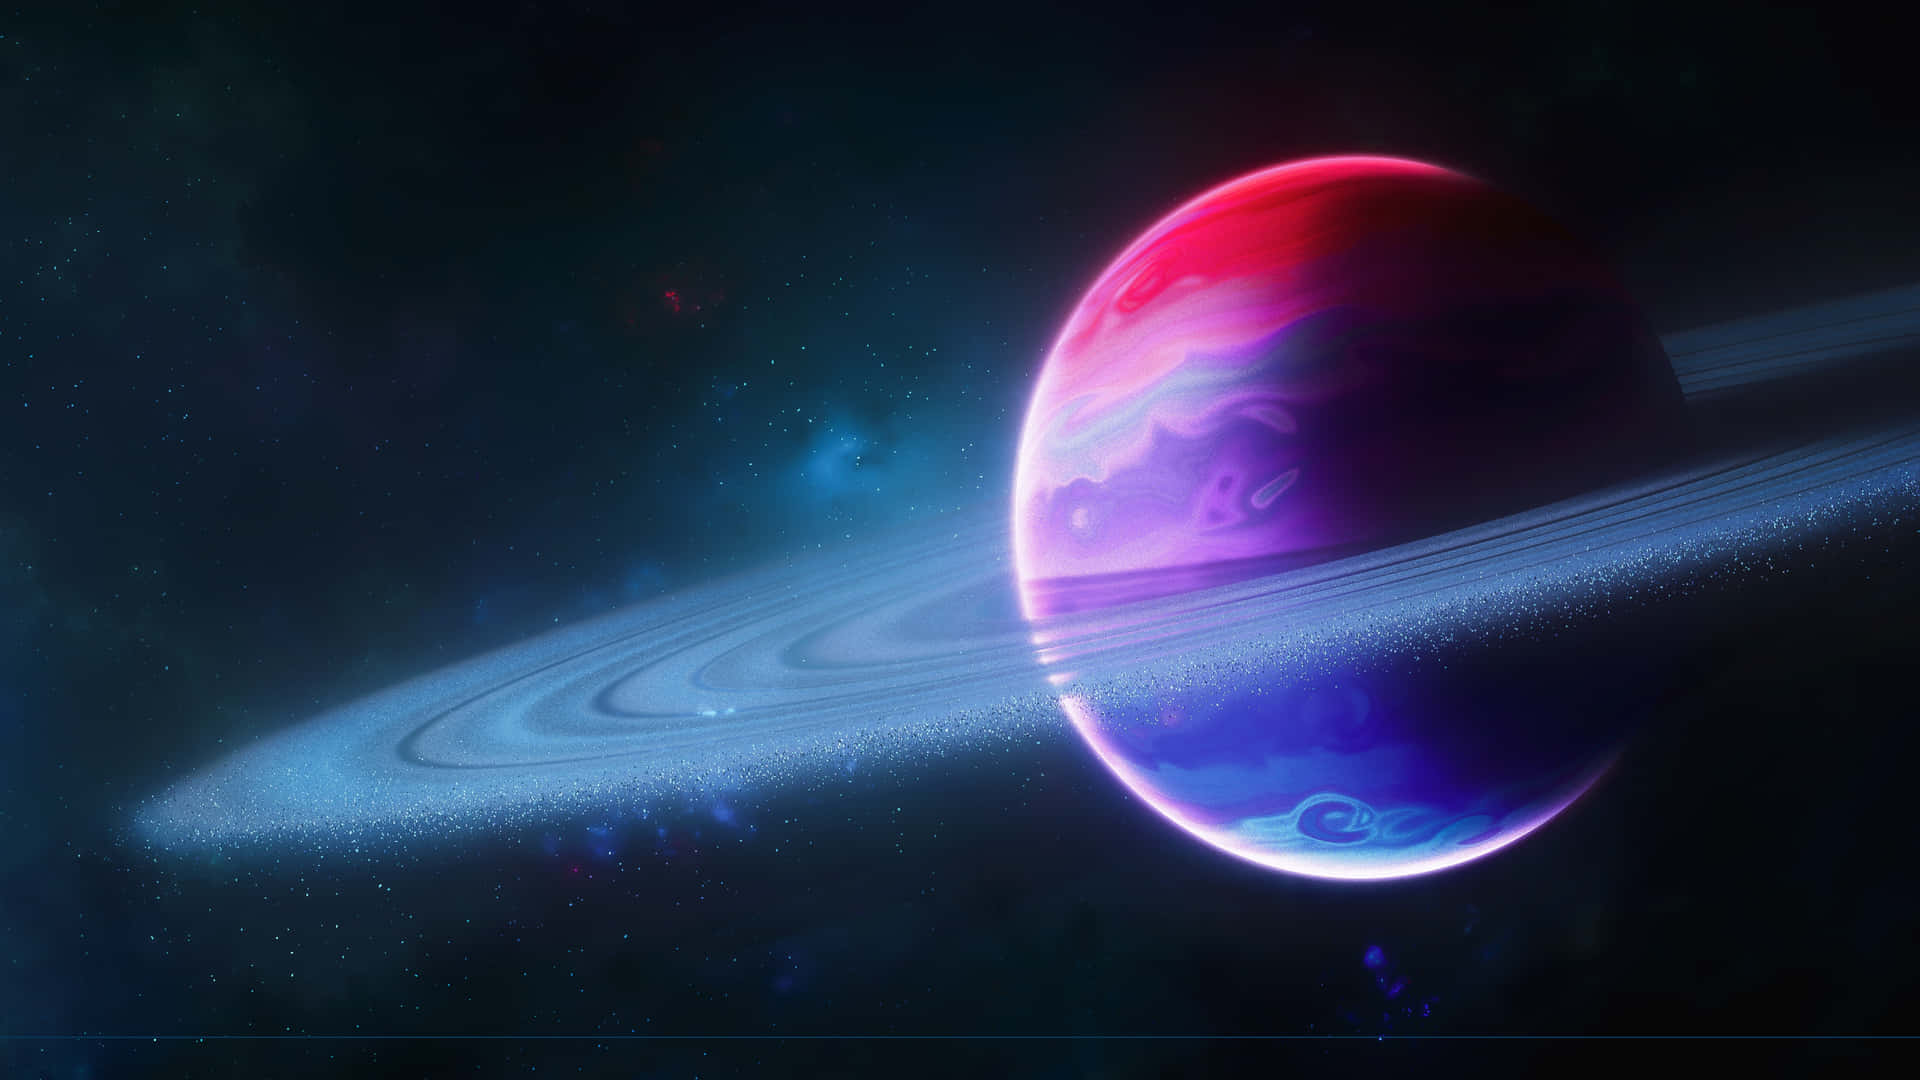 A Saturn In Space With A Red And Blue Ring